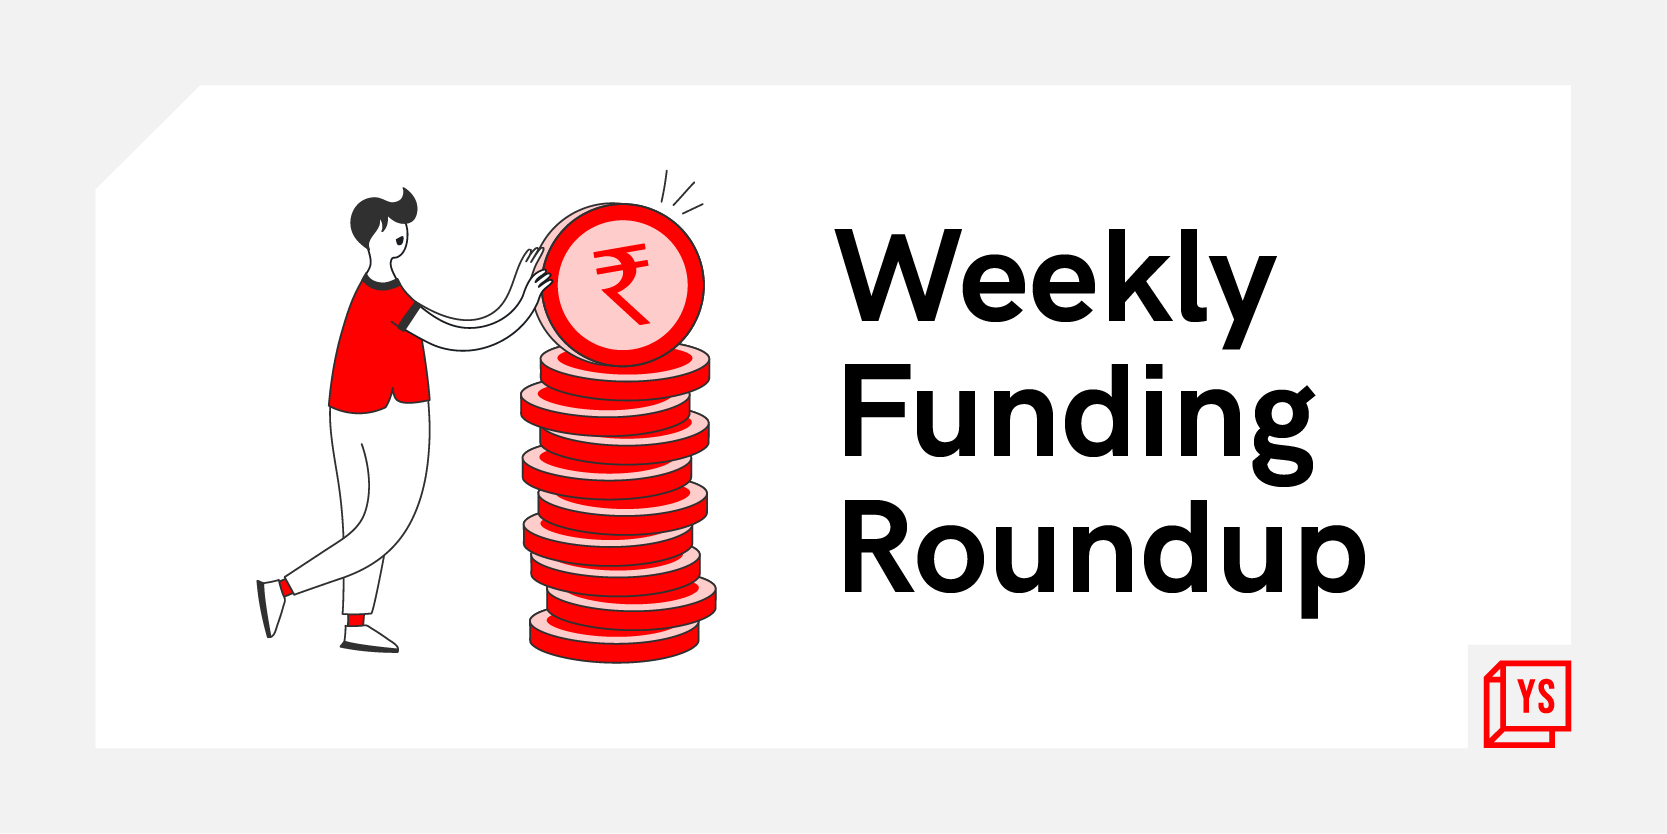 [Weekly funding roundup March 14-18] Steep decline in venture capital inflow into Indian startups

